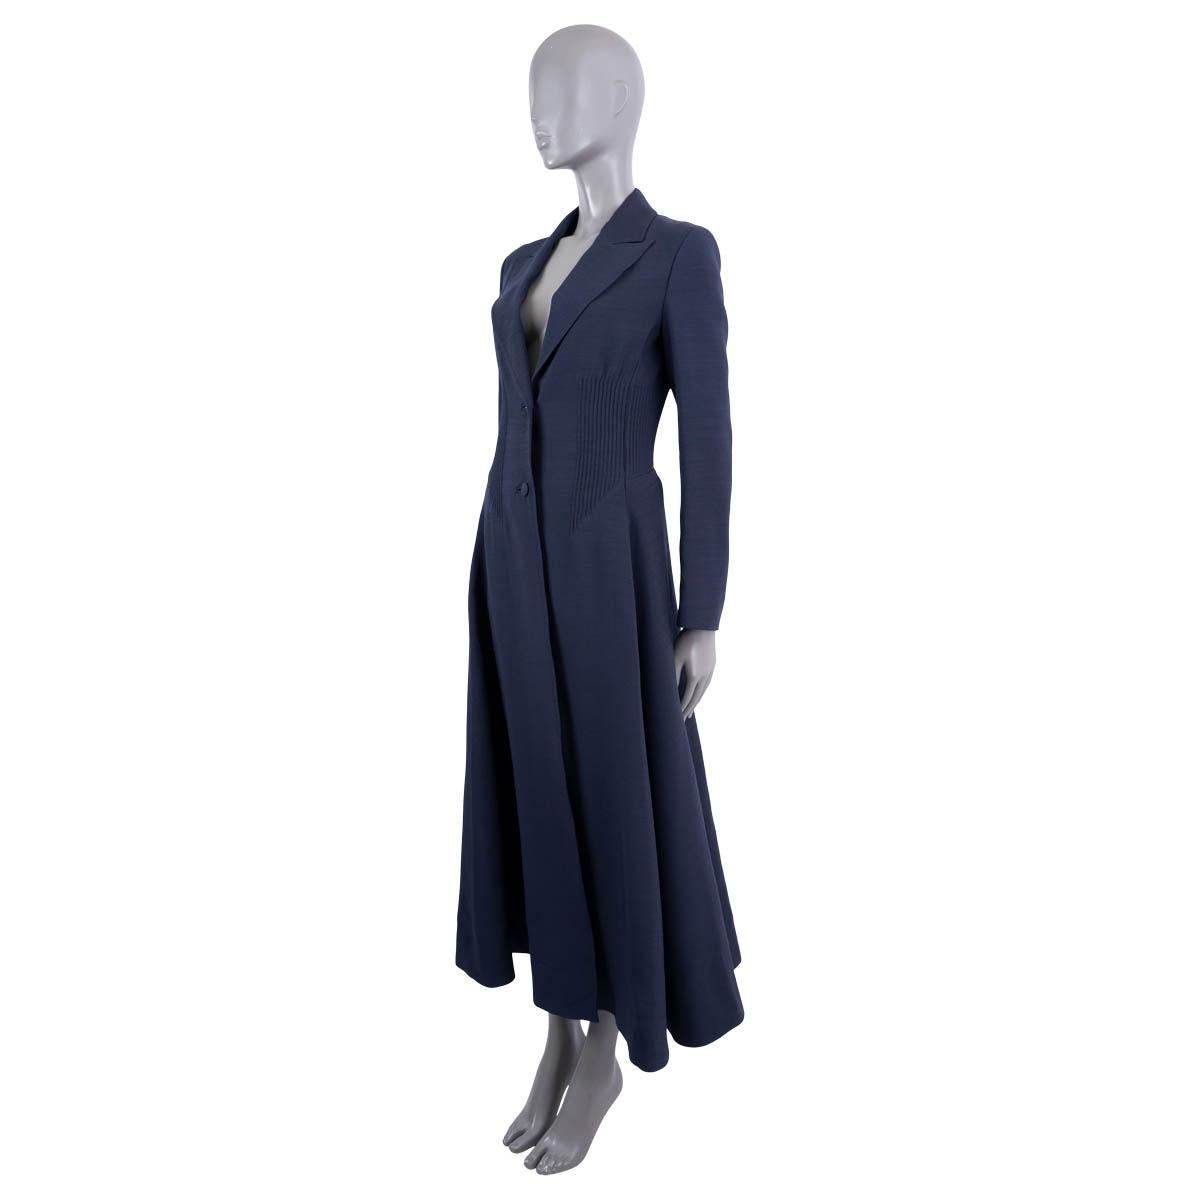 100% authentic Gabriela Hearst Alfonso single-breasted coat in navy blue wool (76%), silk (23%) and elastane (1%). Features a waisted corseted shape and with two pockets in the front. Lined in silk (100%). Has been worn and is in excellent